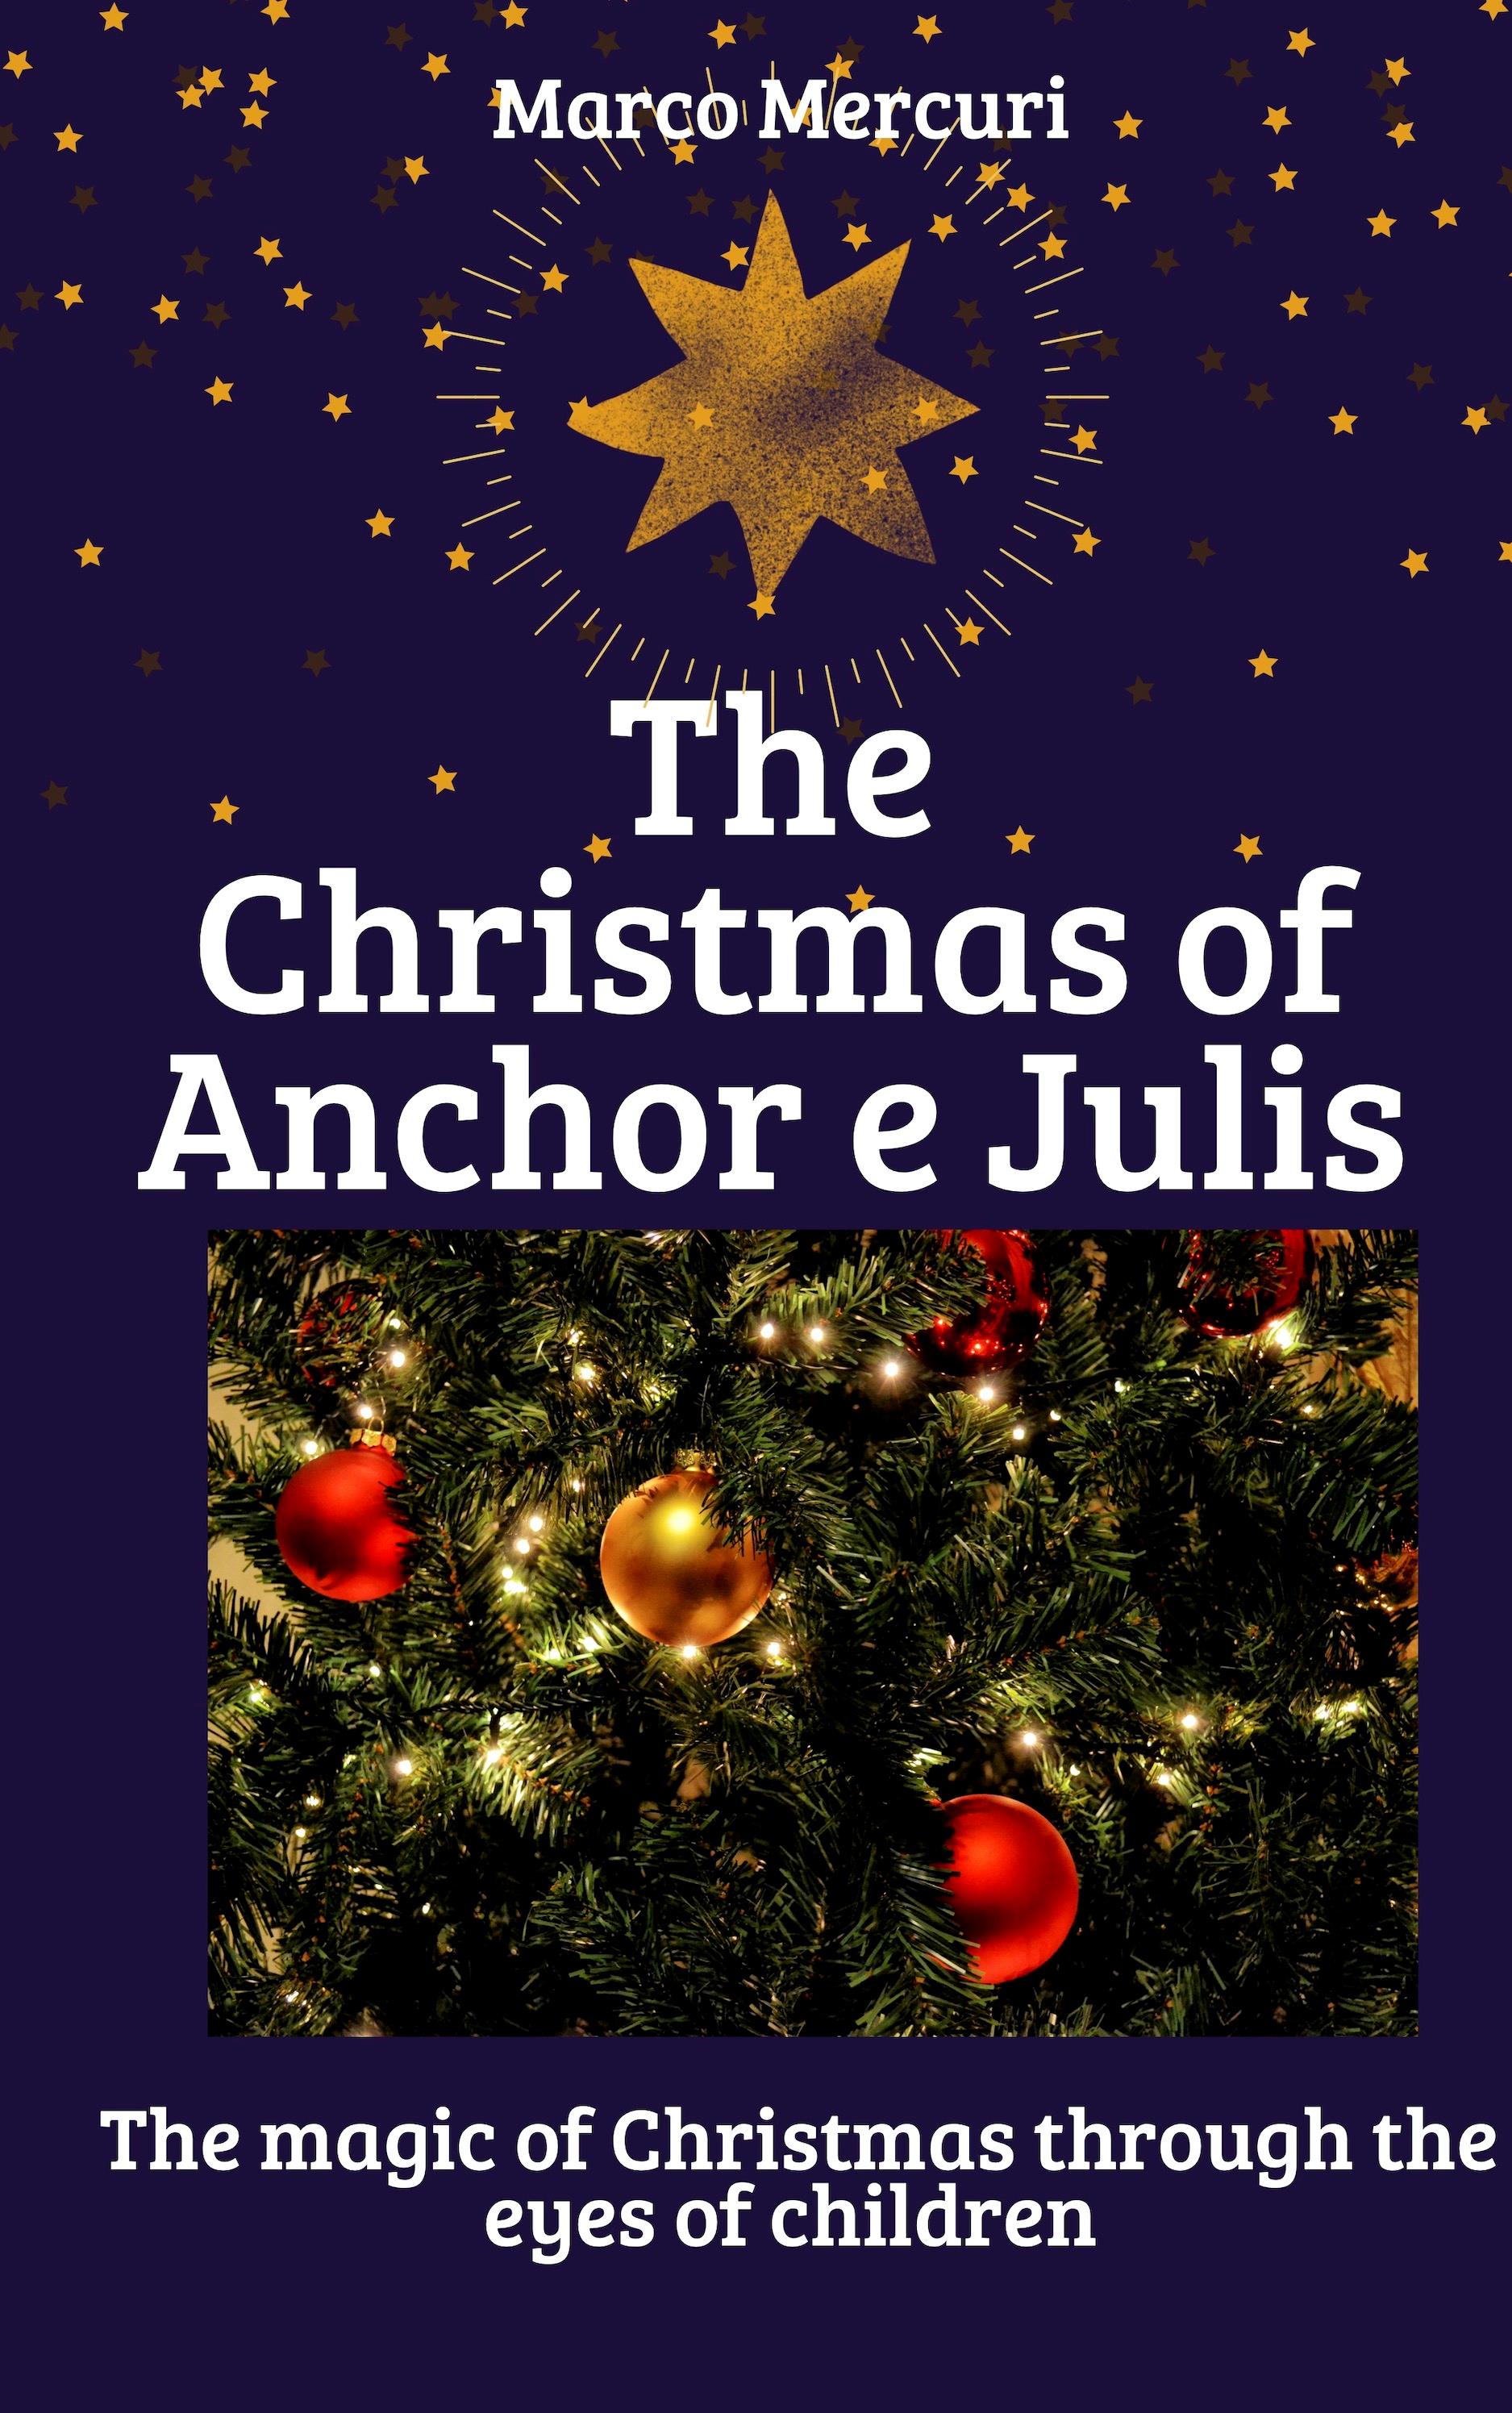 The Christmas of Anchor and Julis